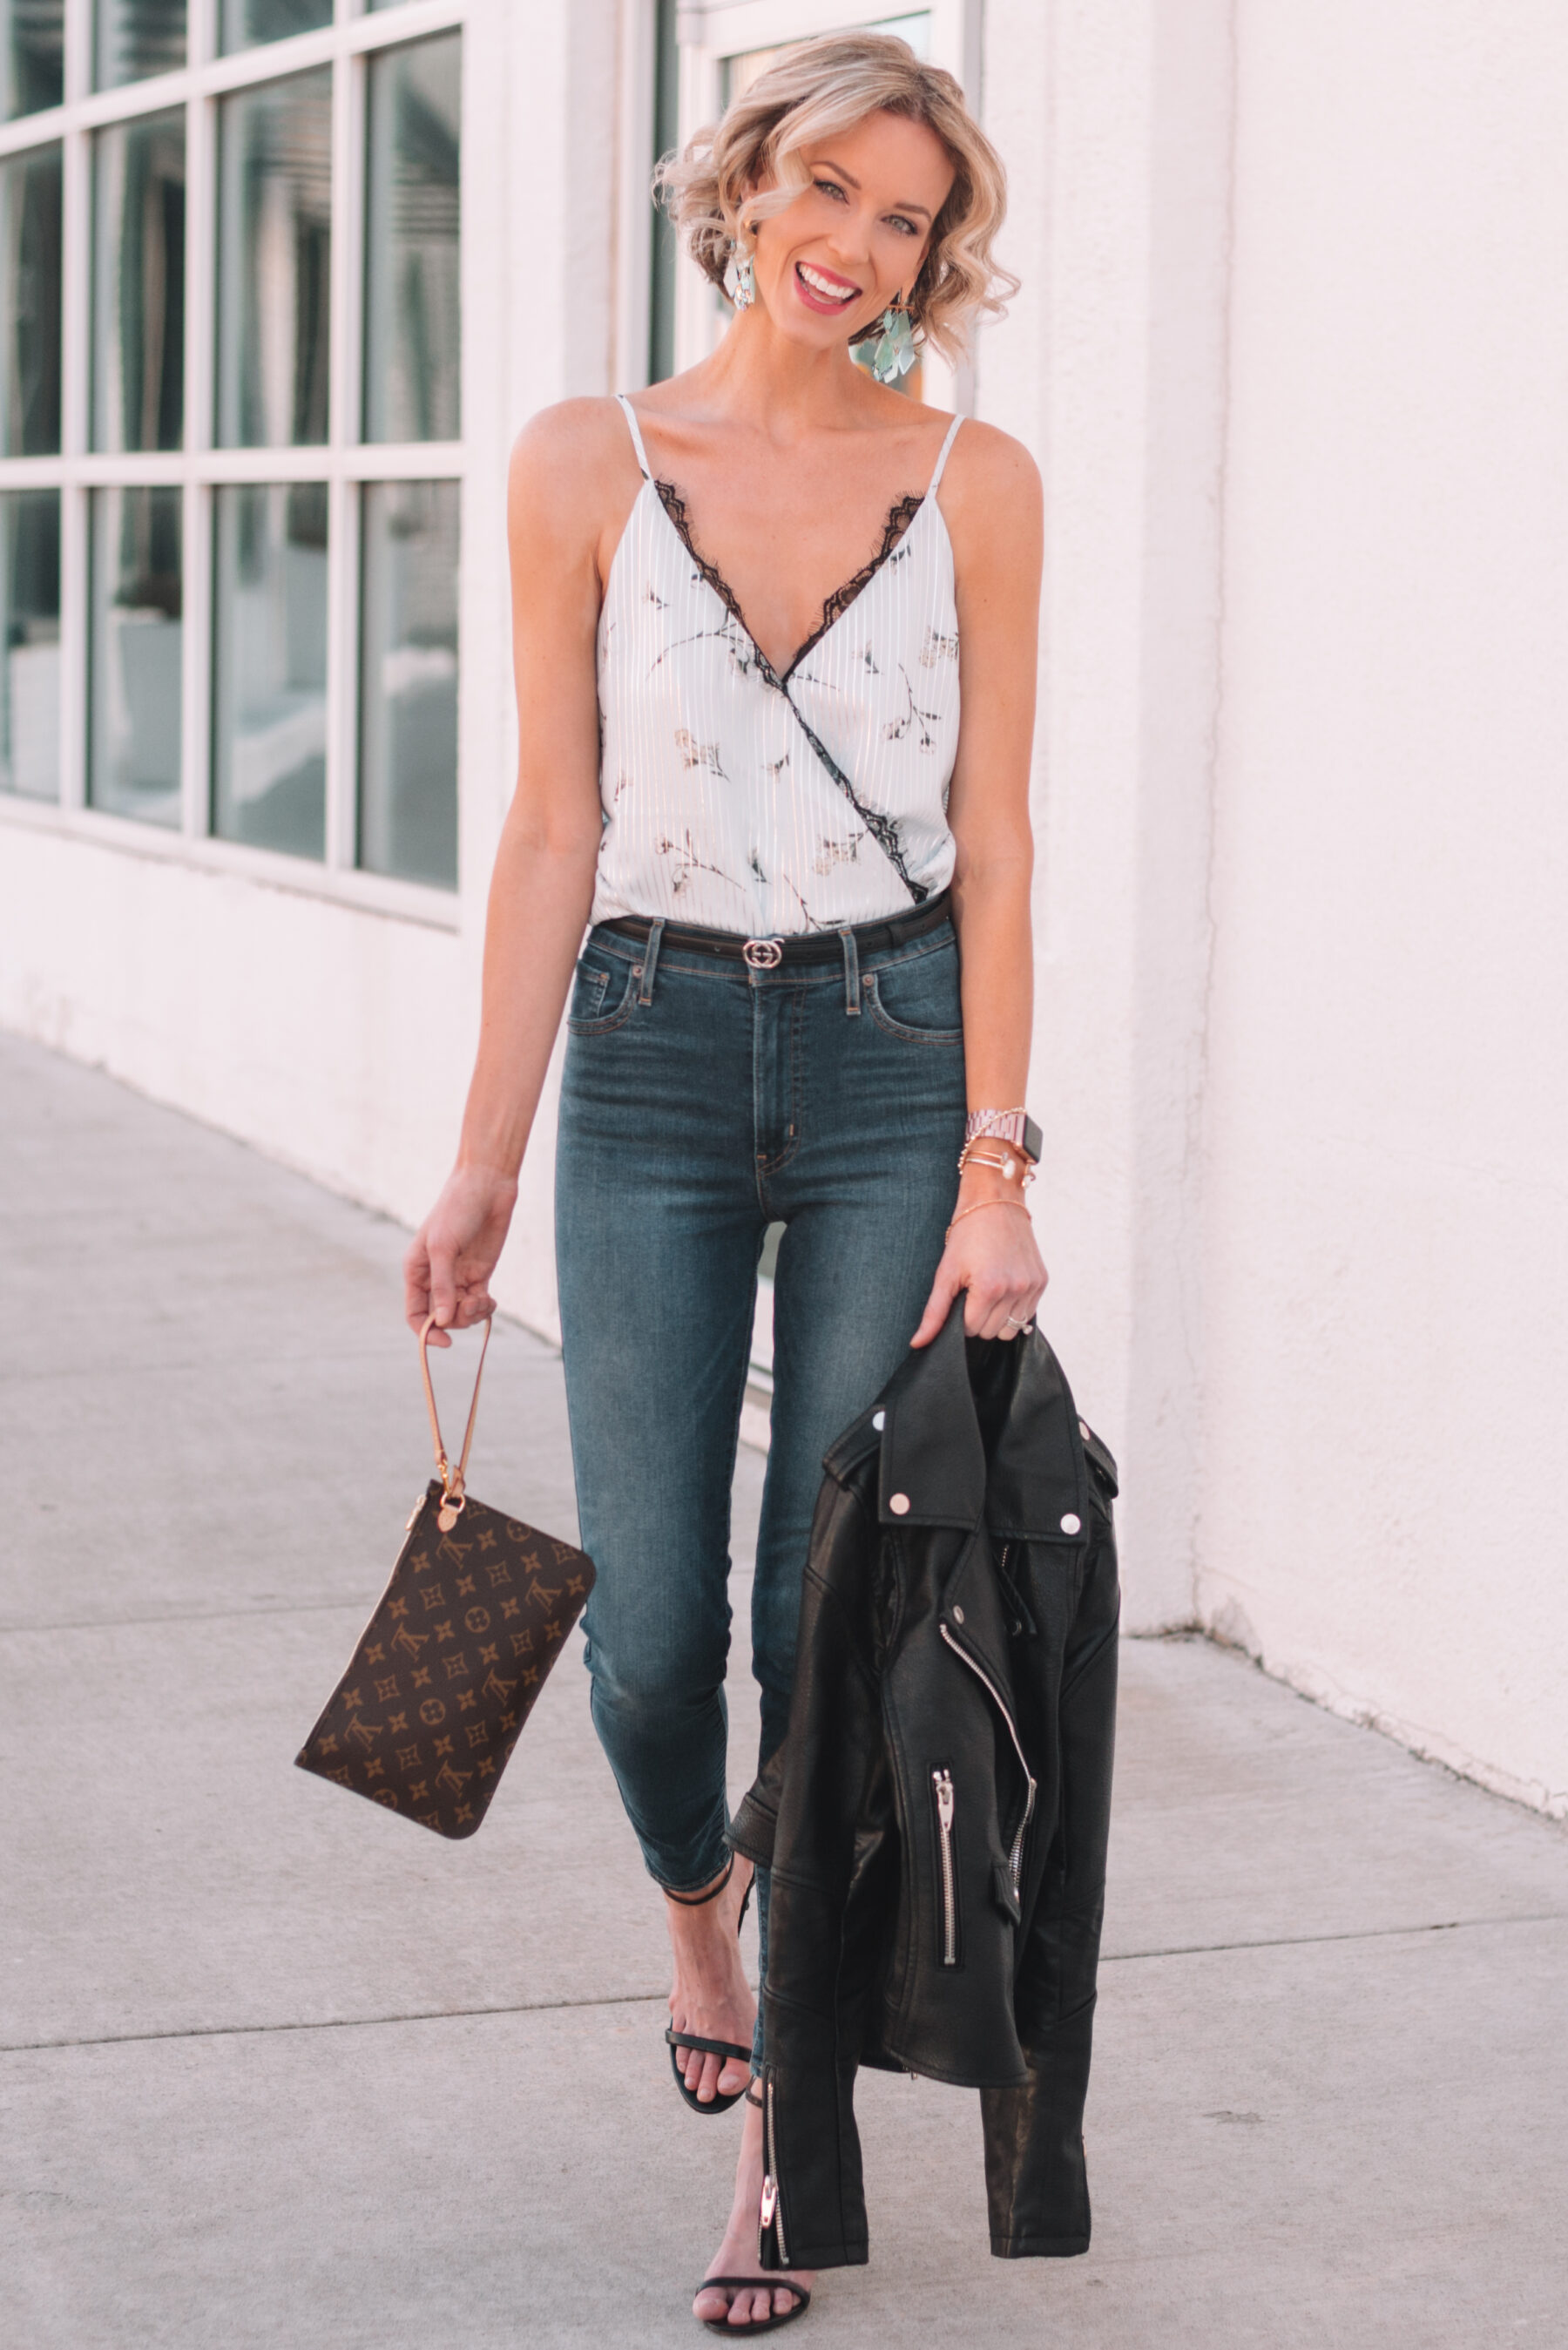 7 Low Rise Jeans Outfit Ideas That Actually Look Flattering